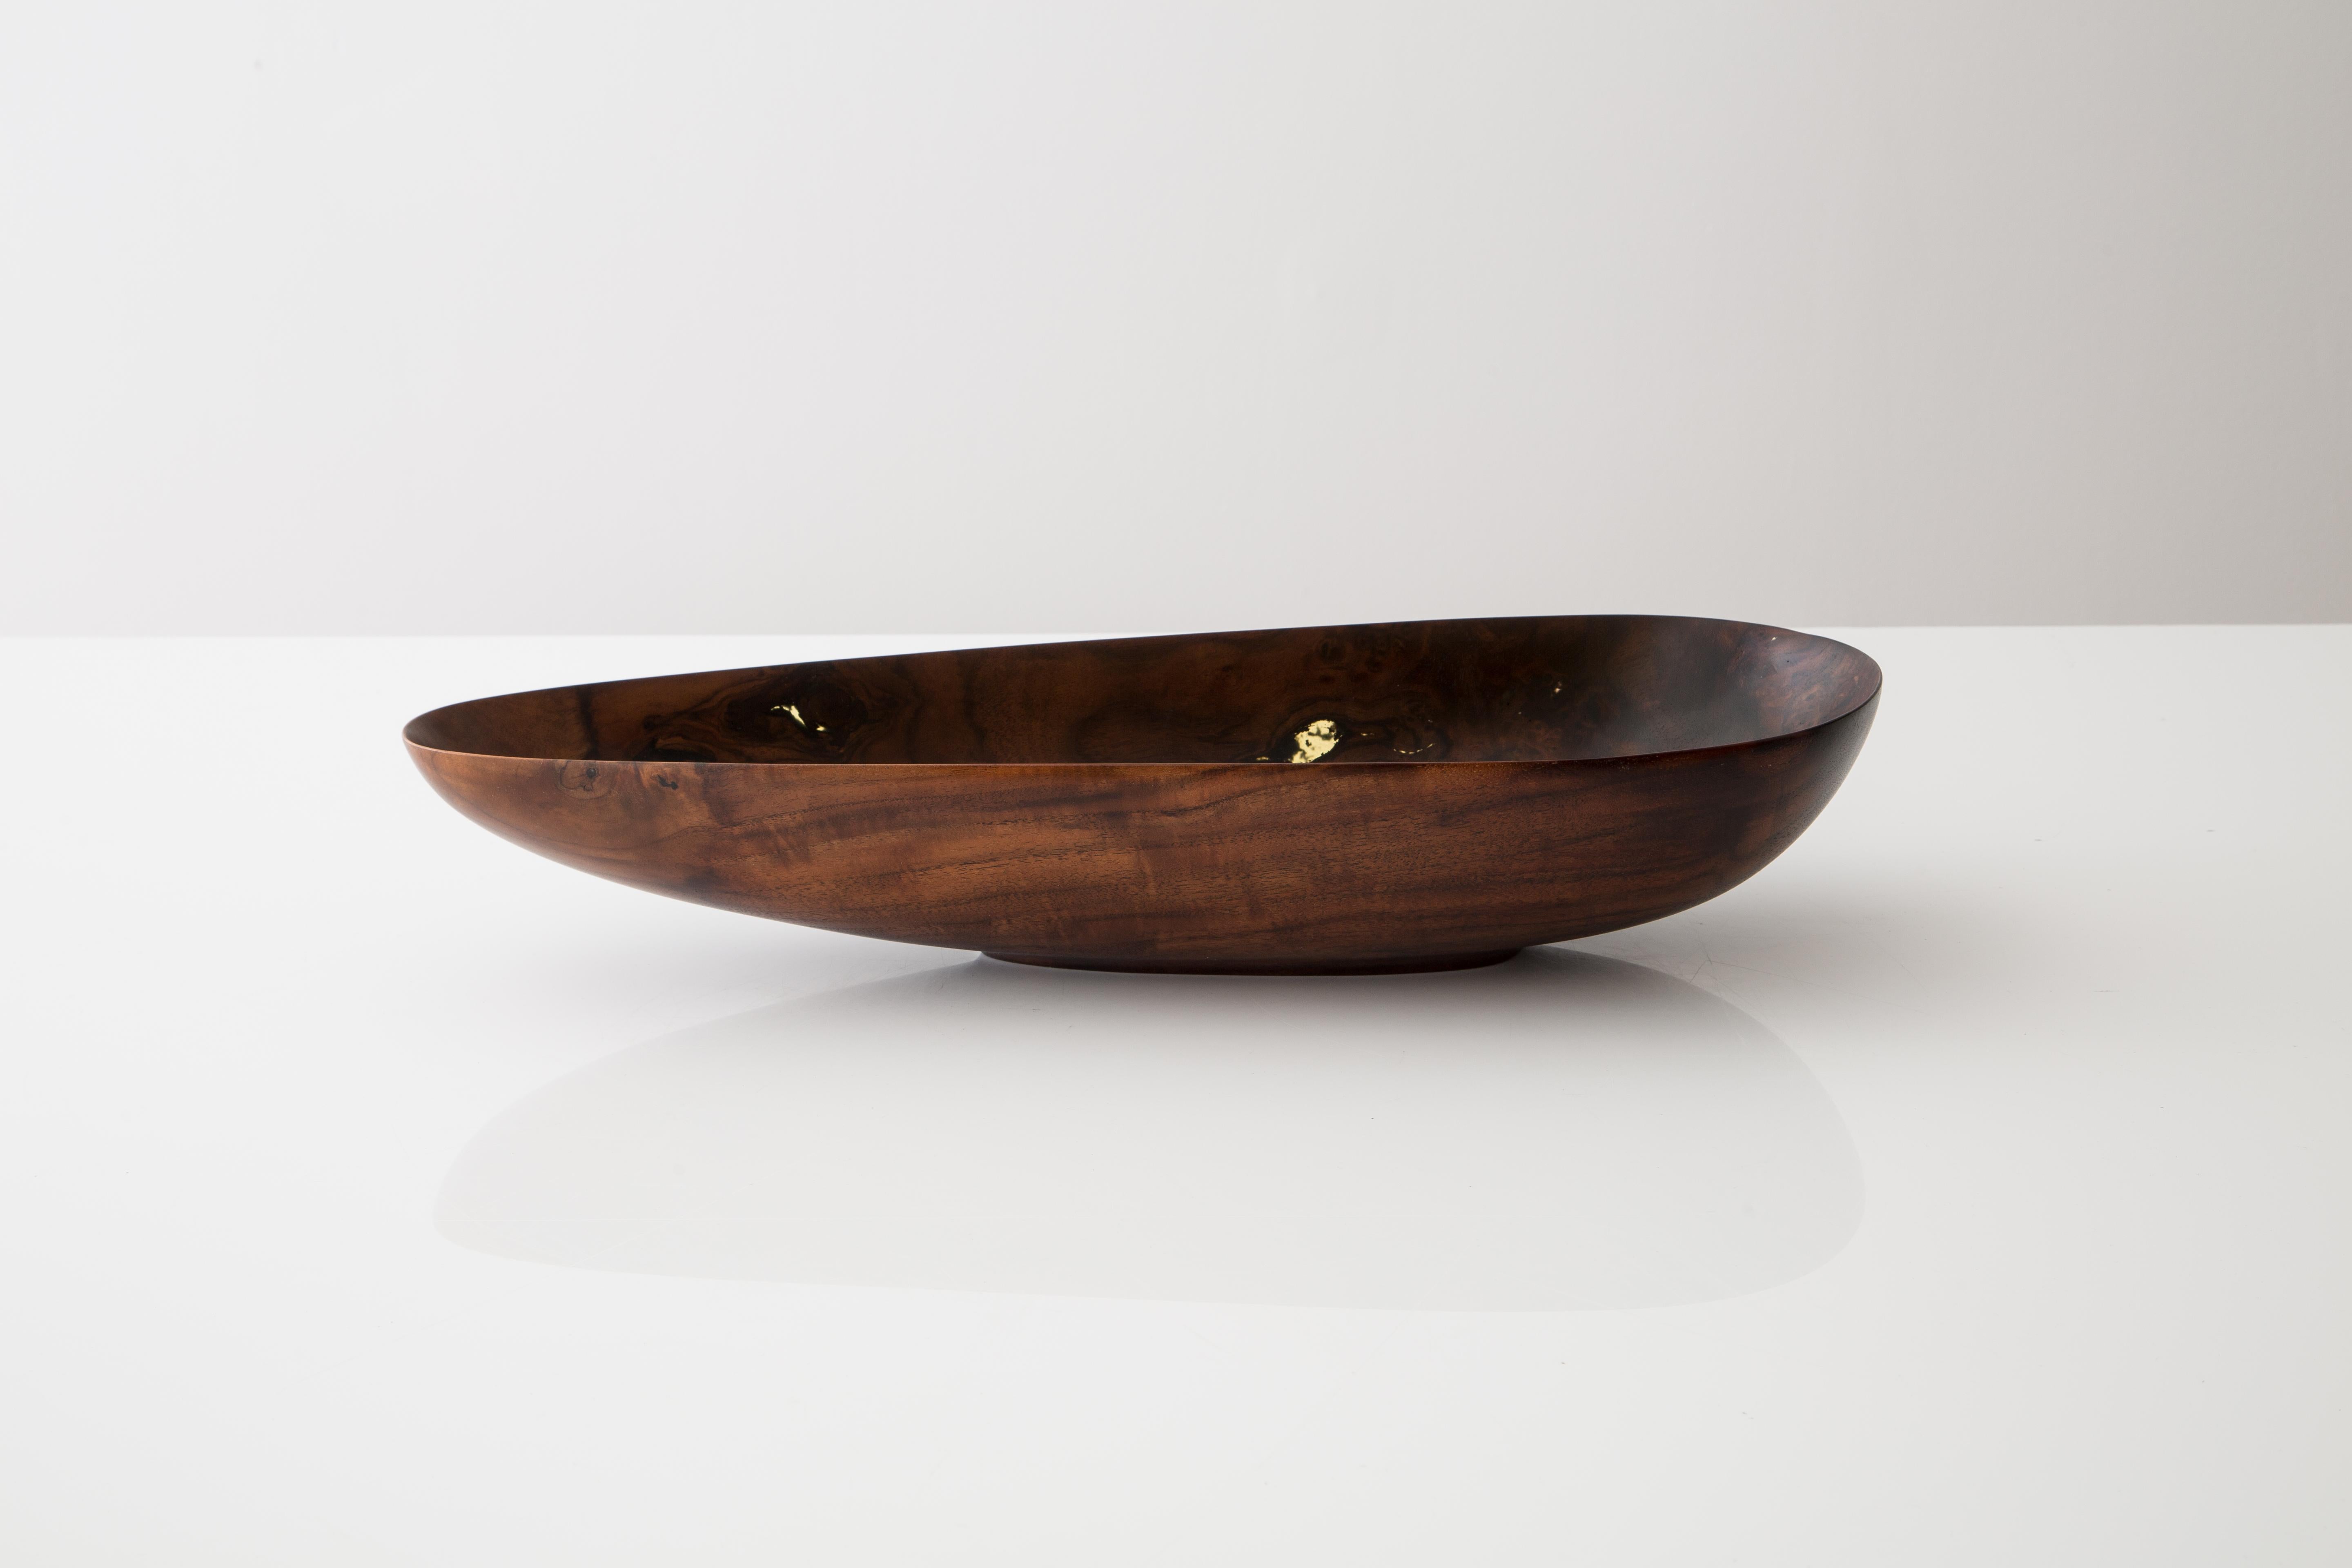 This asymmetrical vessel was been CARVED from a single piece of Claro Walnut salvaged from a firewood pile. The finished bowl highlights everything about what makes Walnut such a desirable wood. The tones and colors range from medium to deep/dark